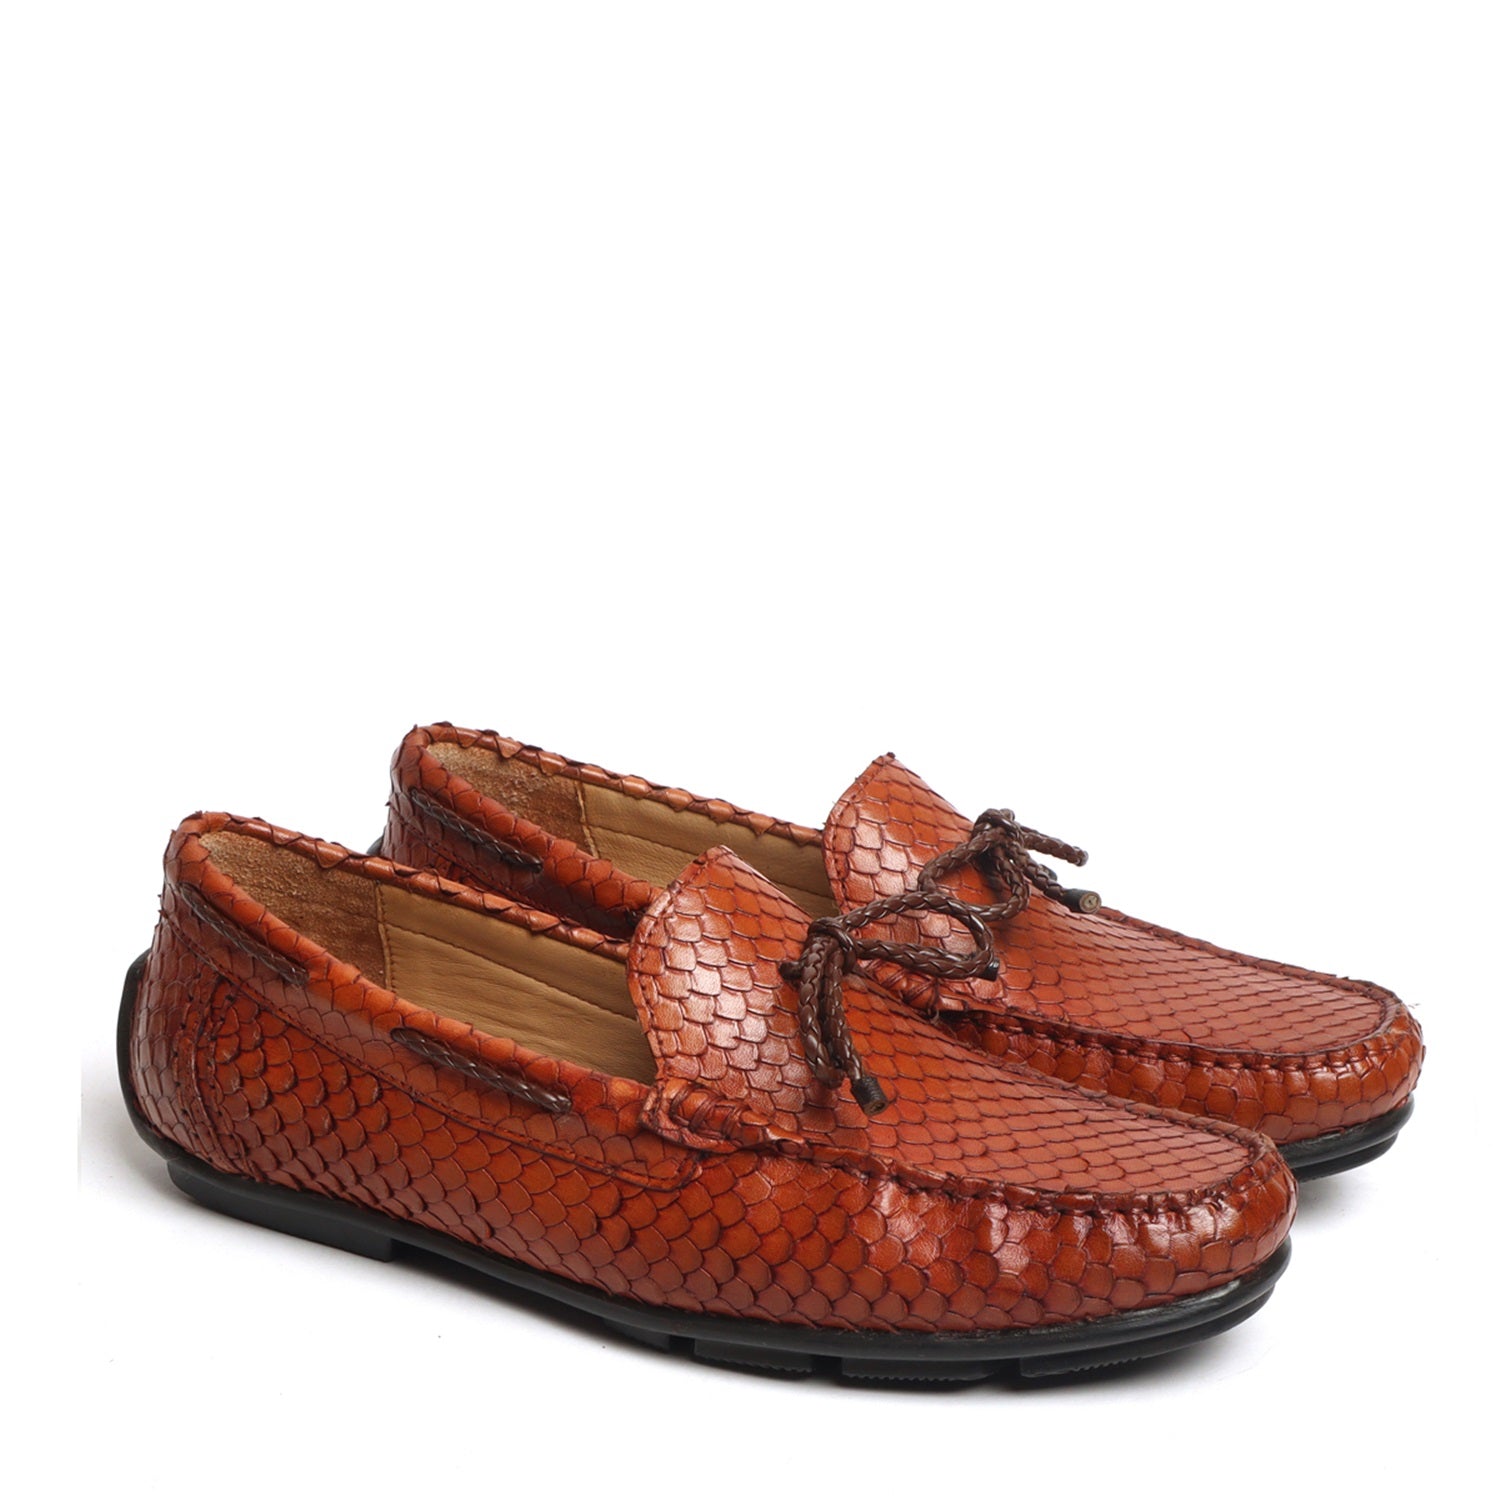 Tassel Bow Loafers Tan Snake Scales Textured Leather